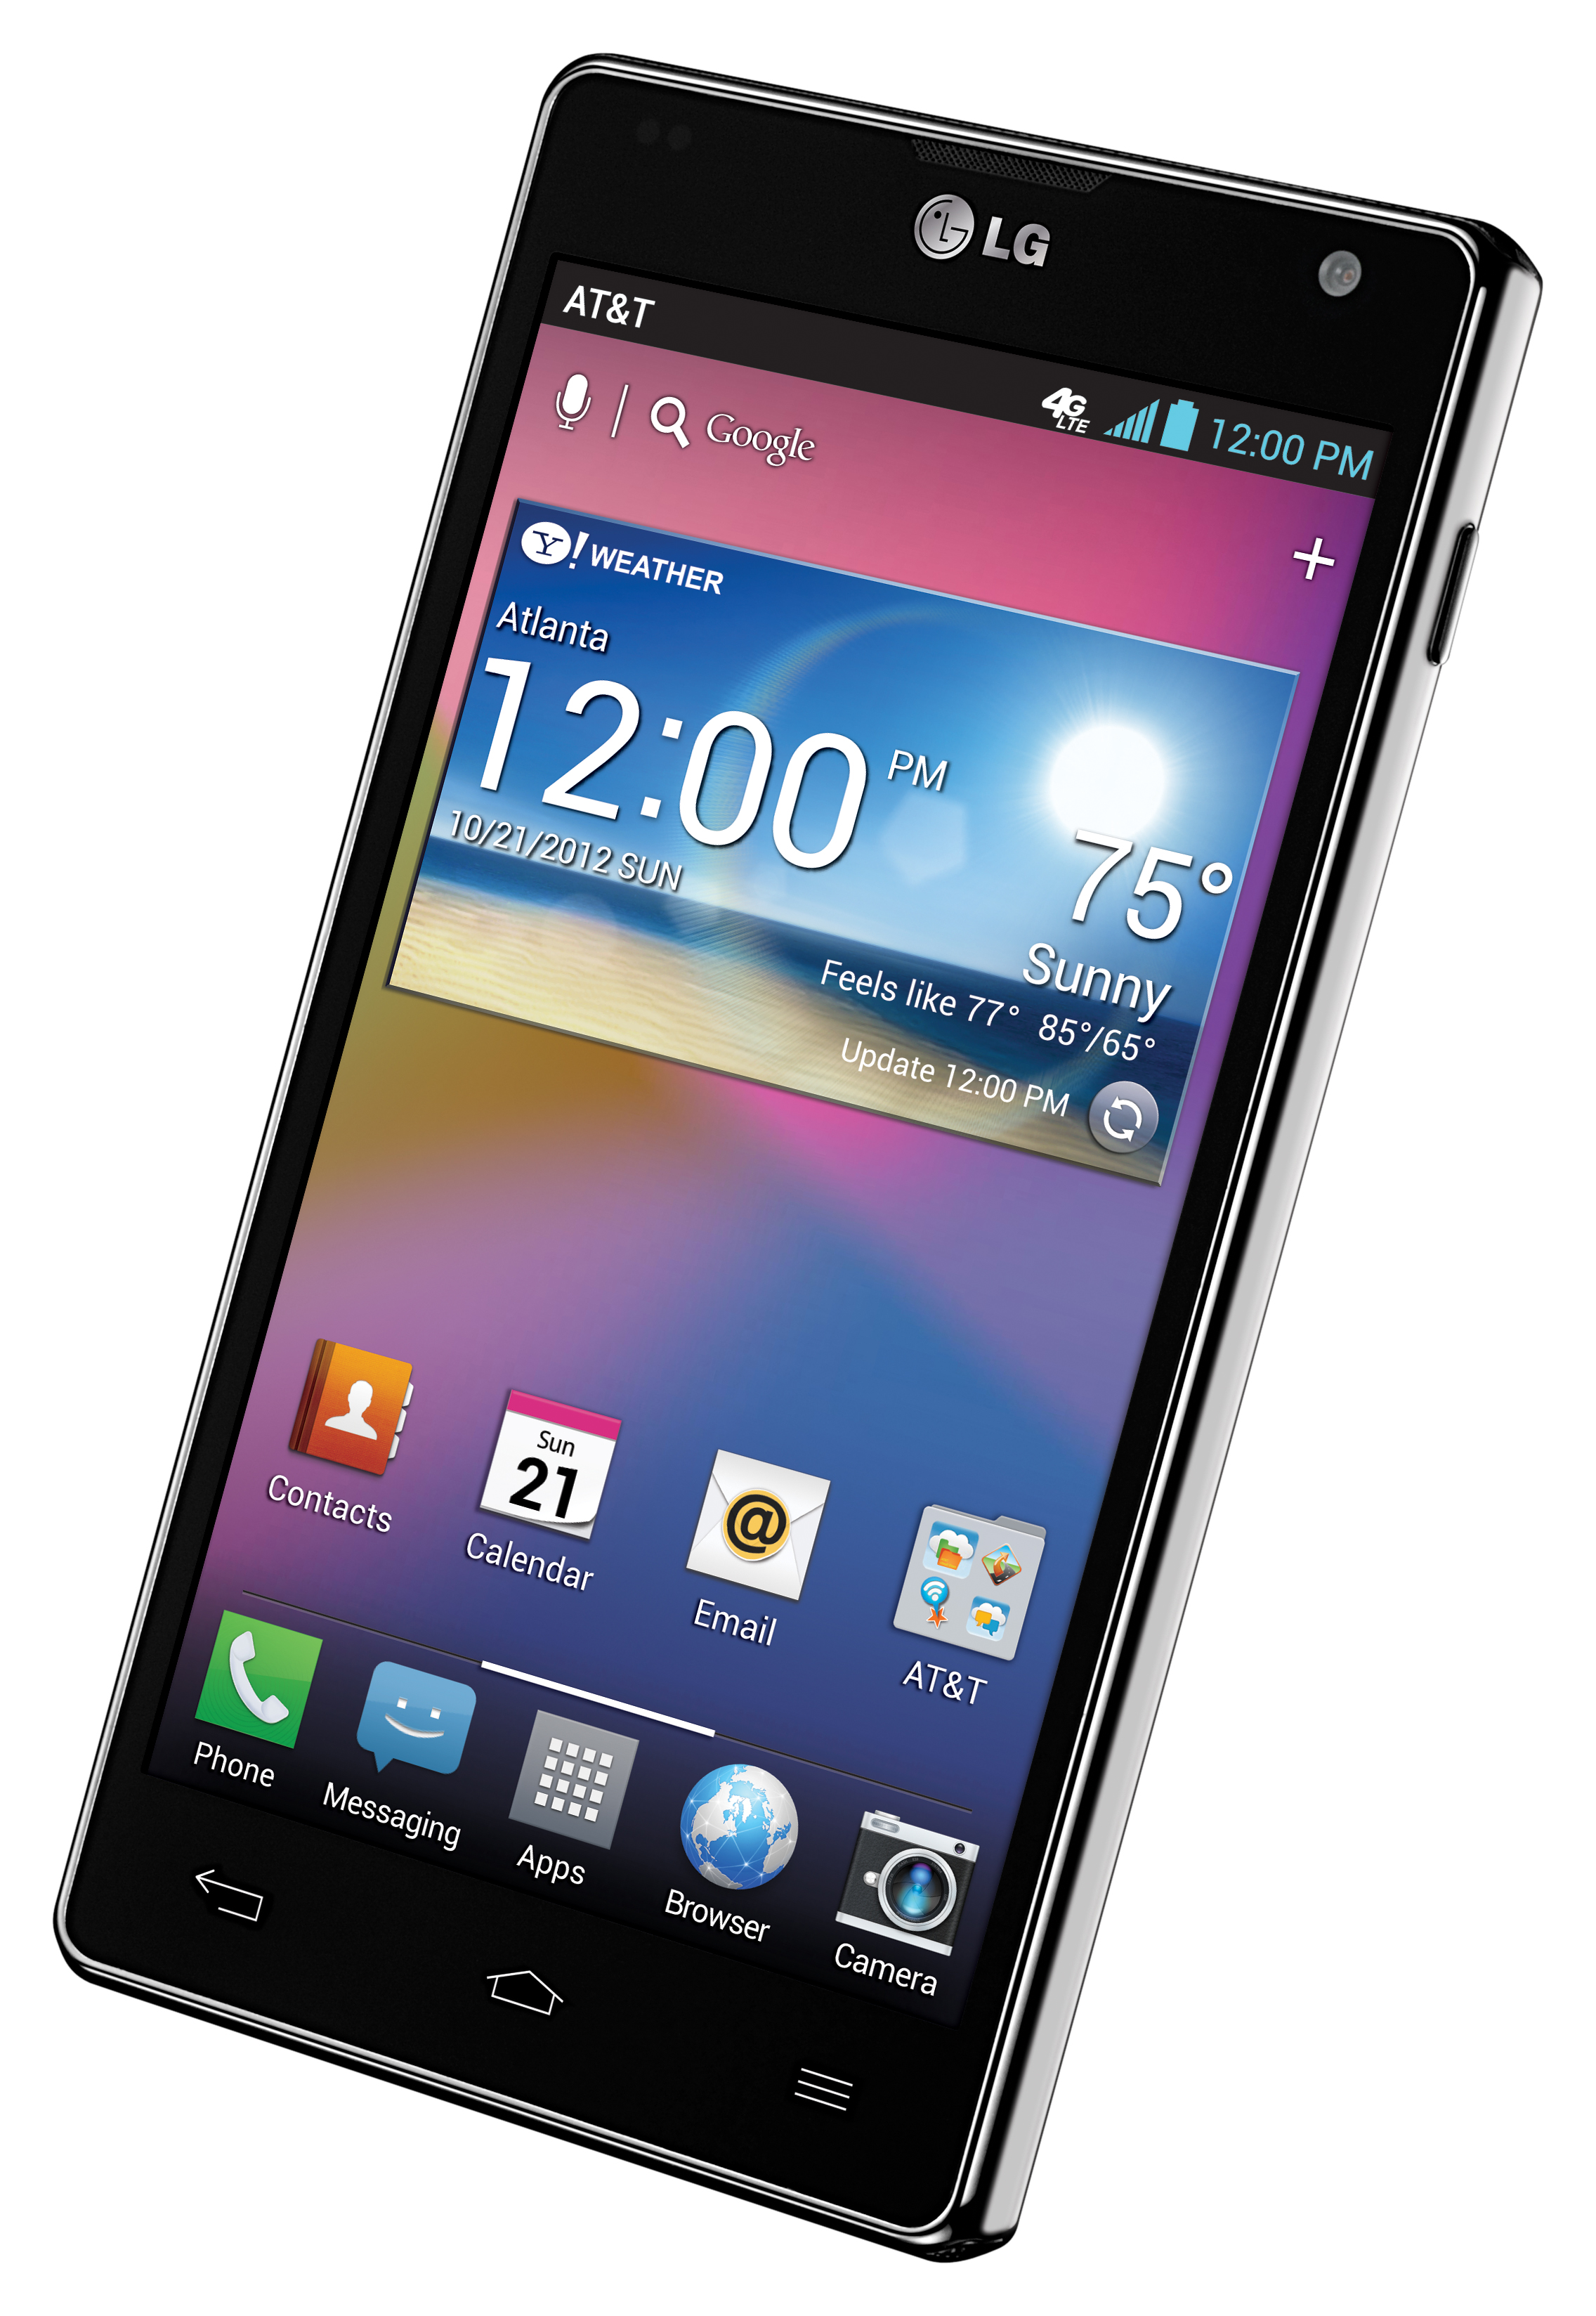 LG unveils ICSpowered LG Optimus G for AT&T and Sprint networks